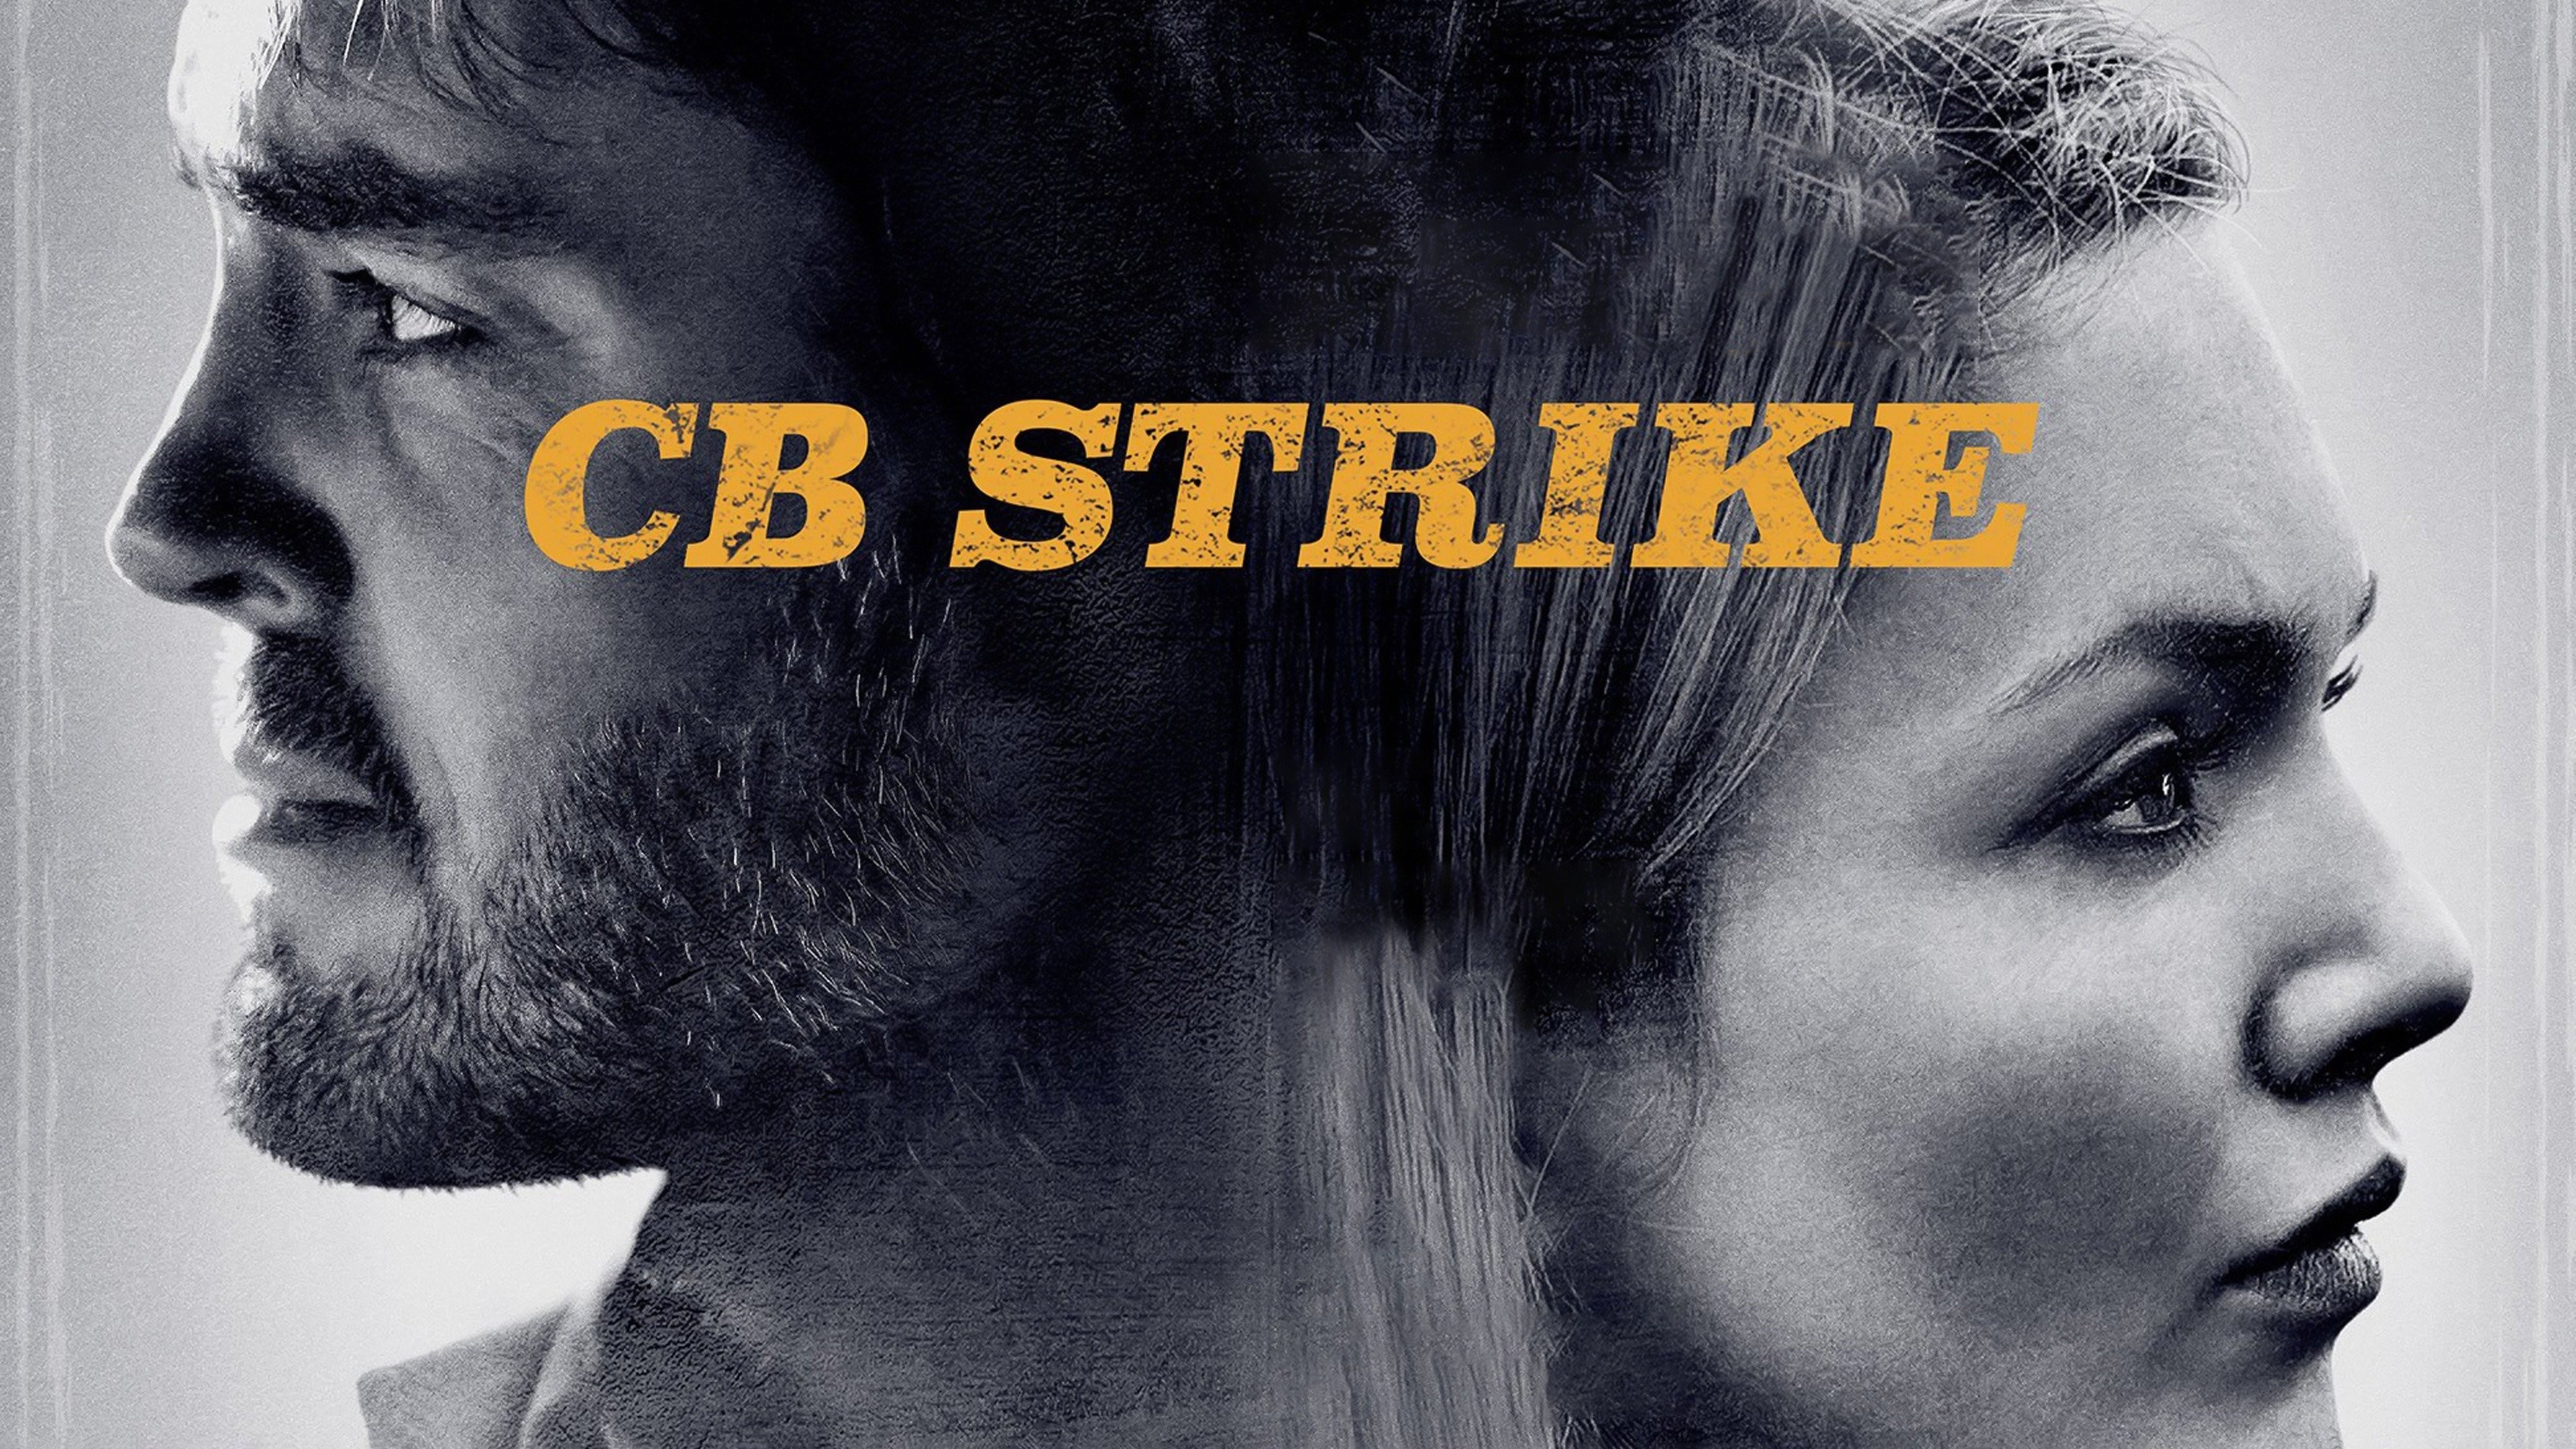 Strike season 5, Confirmed release date and news for Troubled Blood